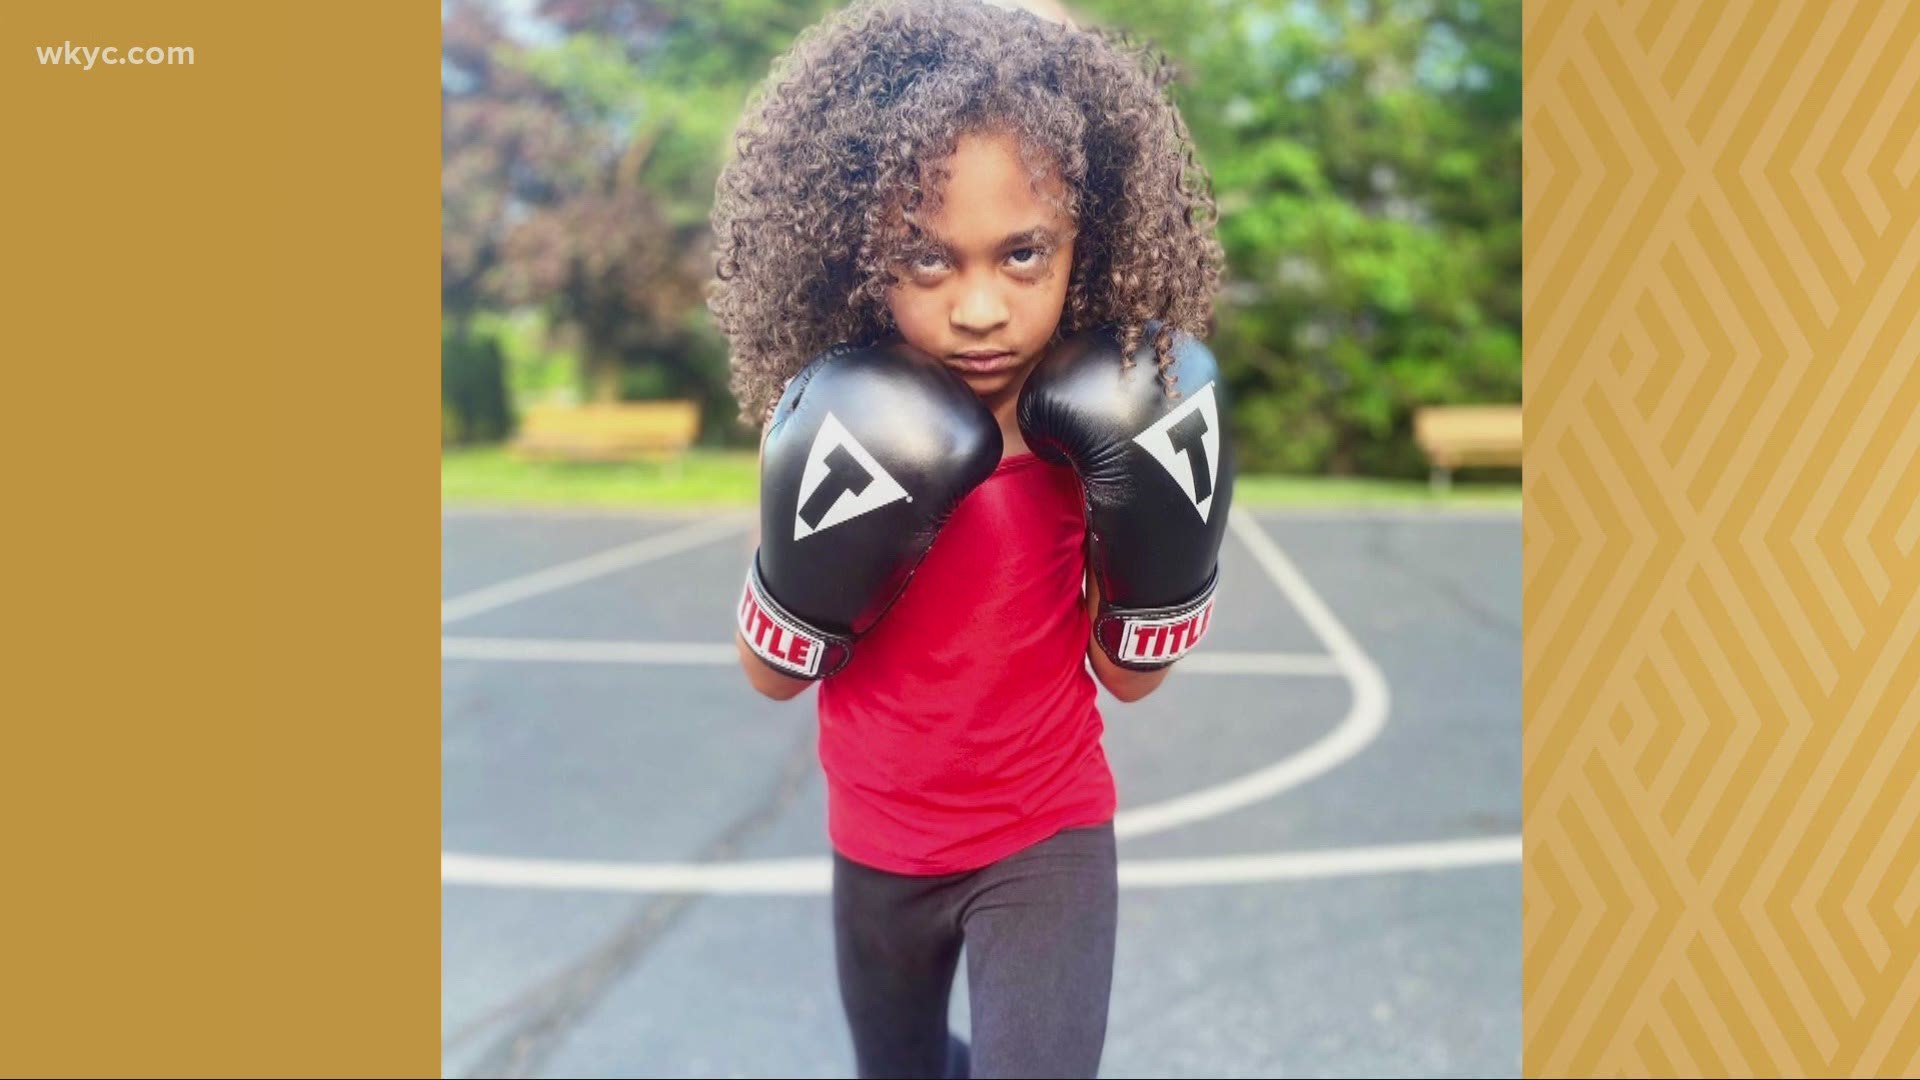 6-year-old Ruby Tucker has become an internet sensation for her boxing moves. We at 3News connected with Laila Ali to surprise her with a special birthday message.